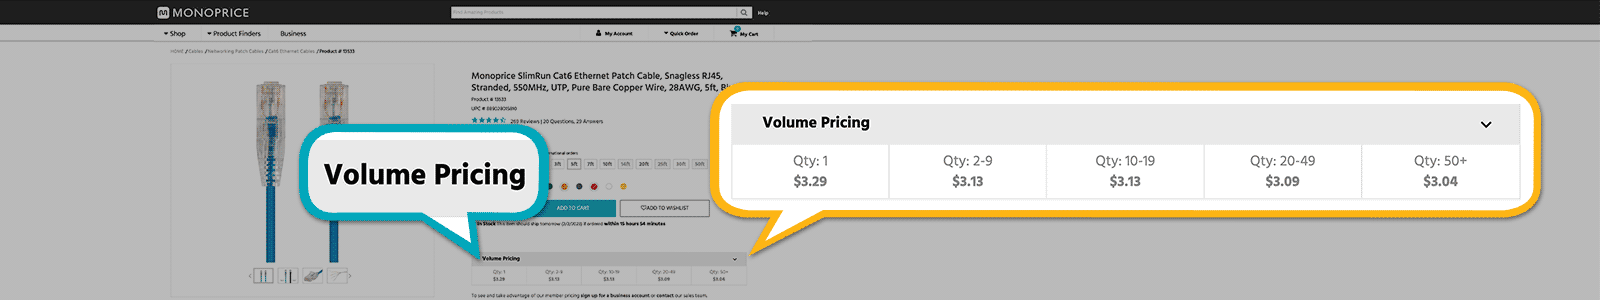 Full Volume Pricing Product Page